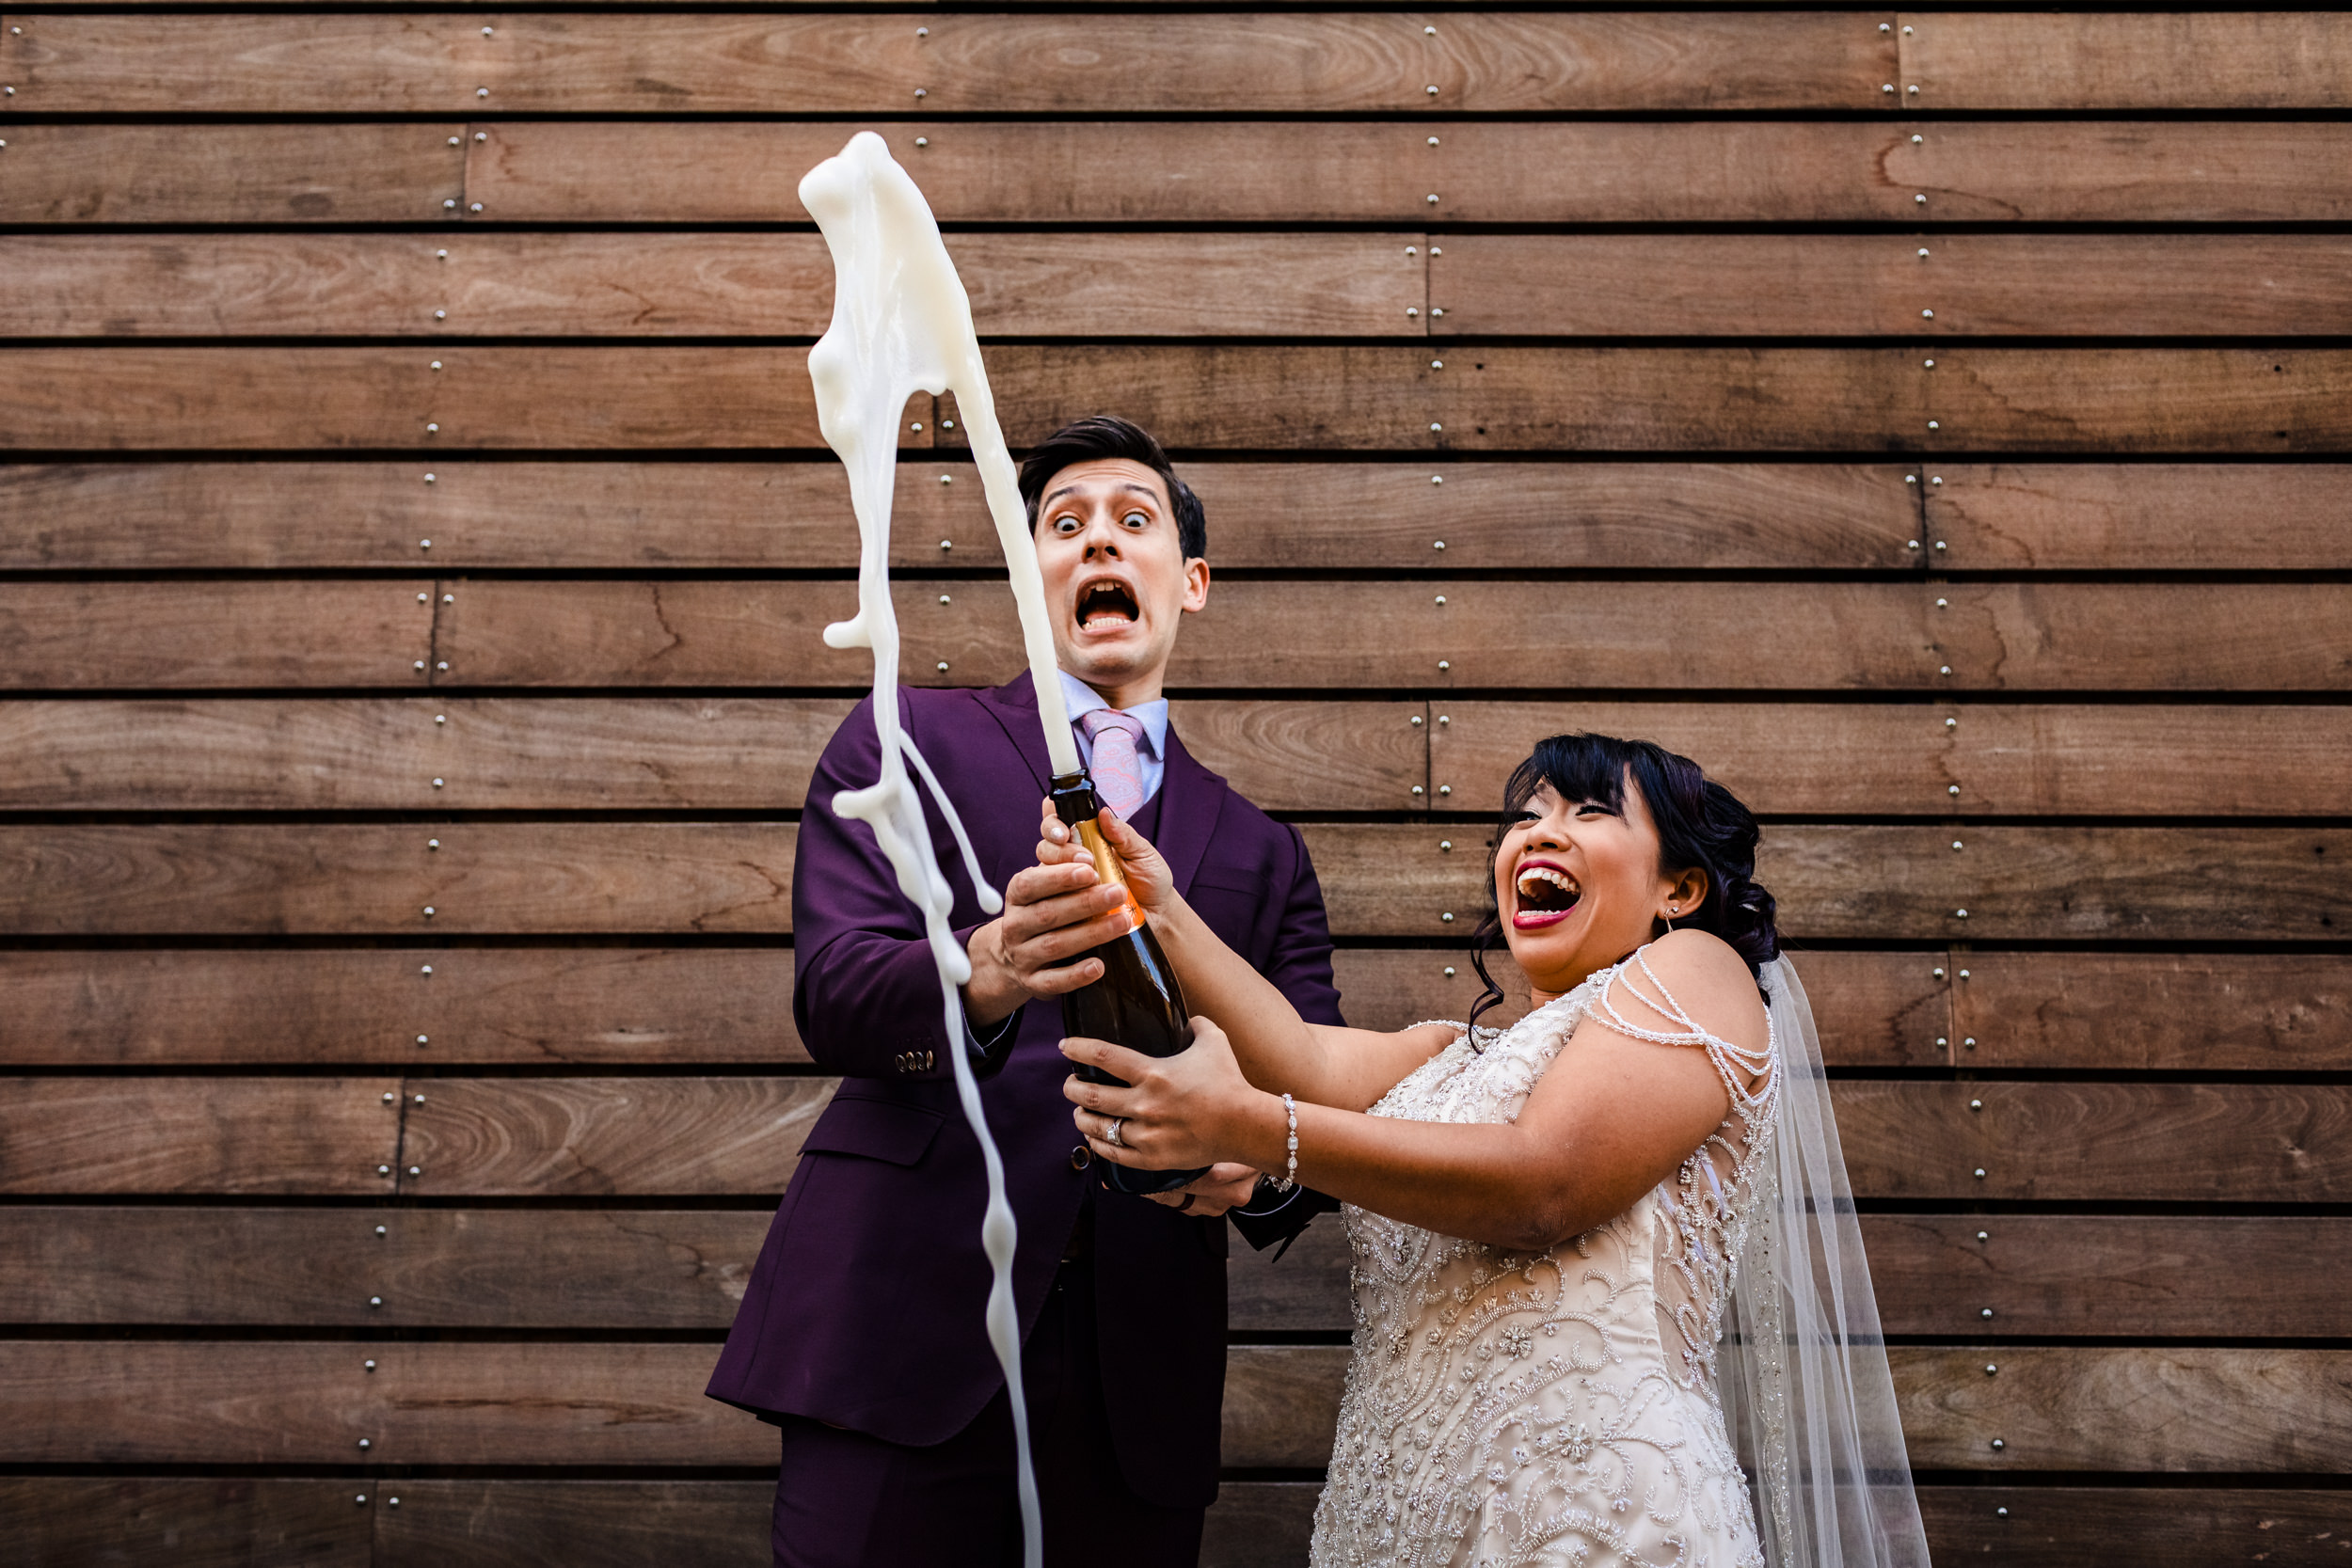 A couple reacts to a champagne bottle spraying during a wedding at the Joinery in Chicago.